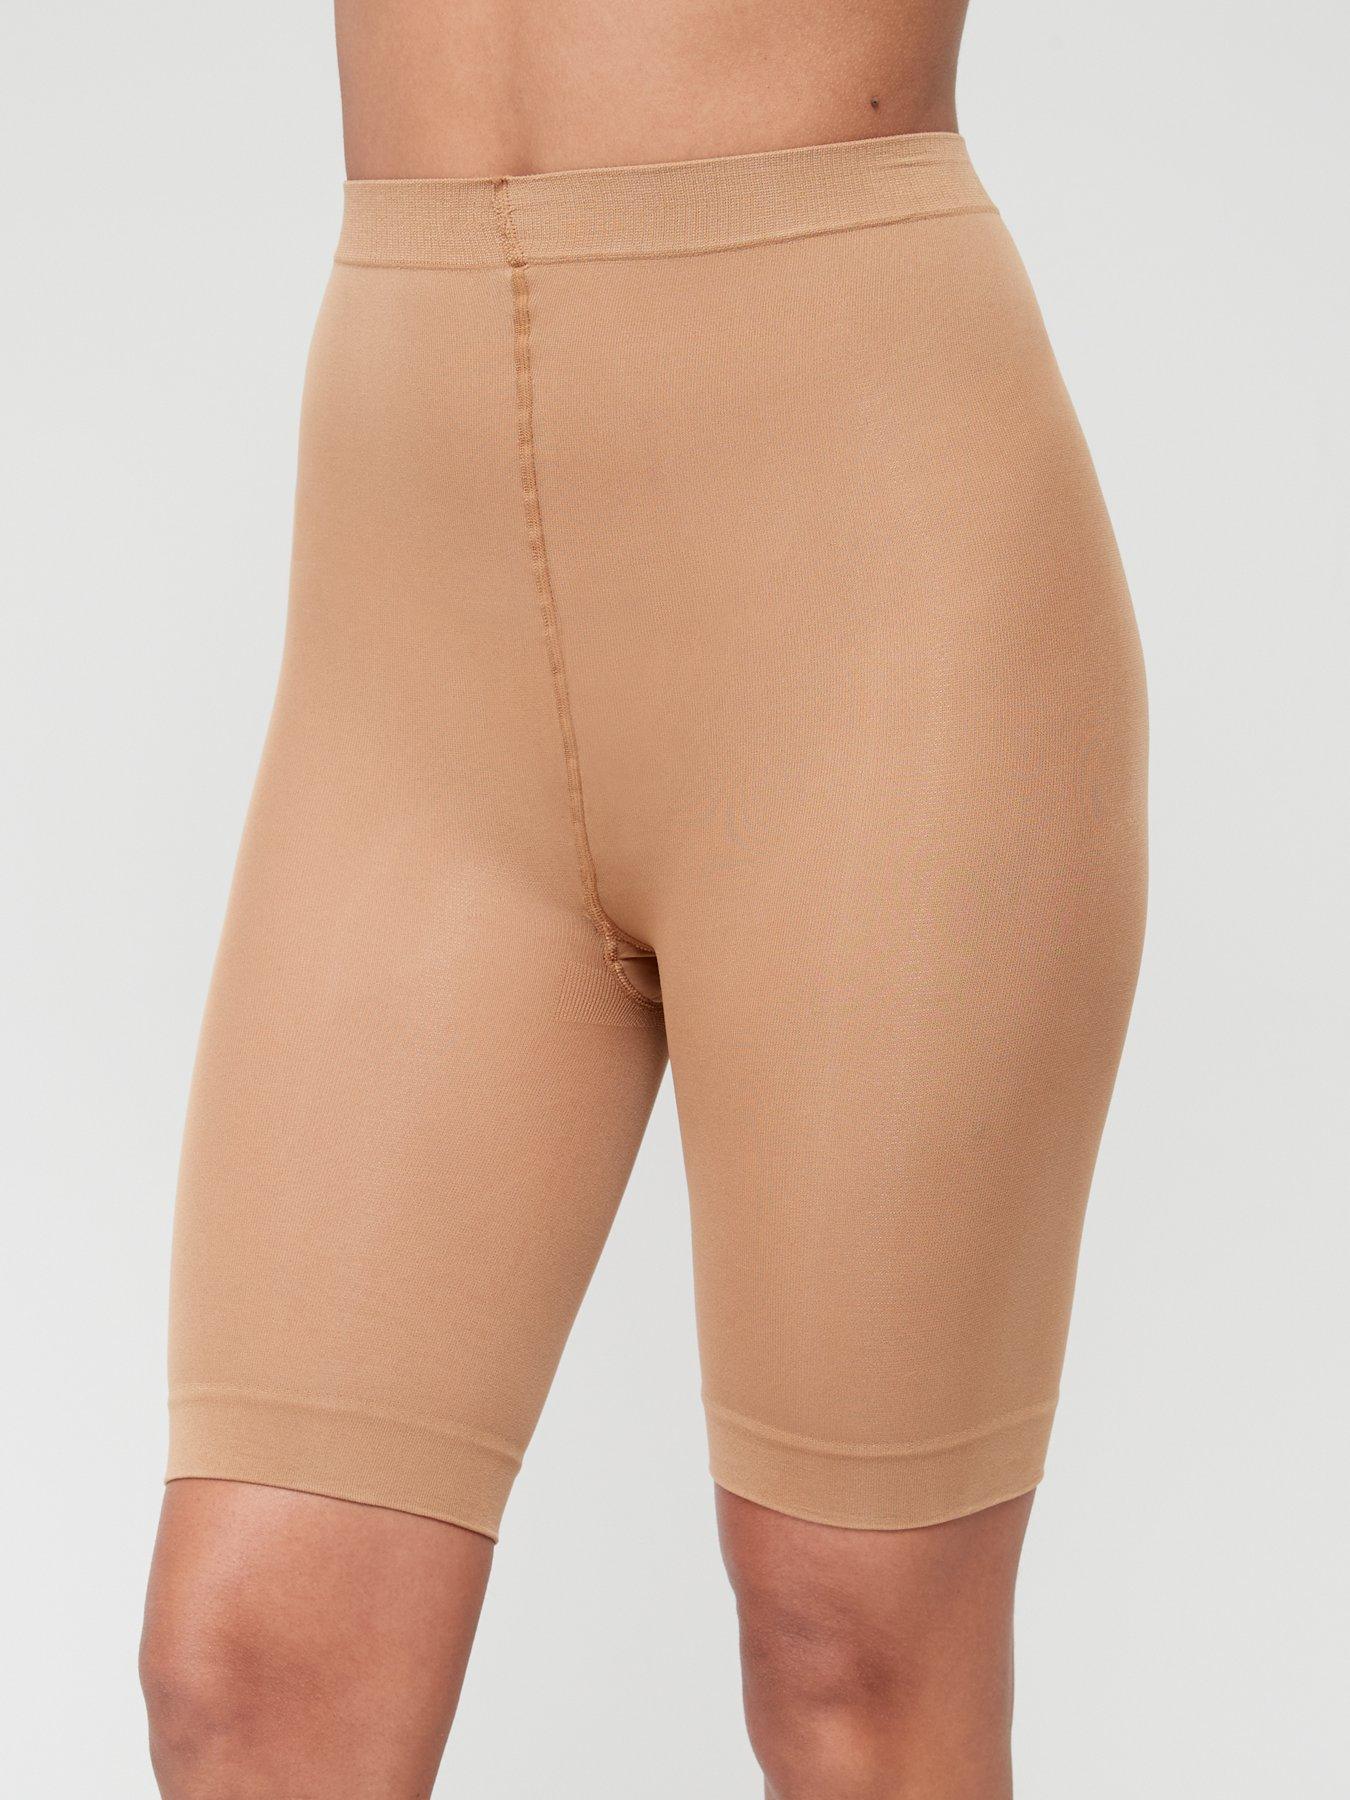 Spanx OnCore High-Waisted Mid-Thigh Short in Naked 3.0 - Busted